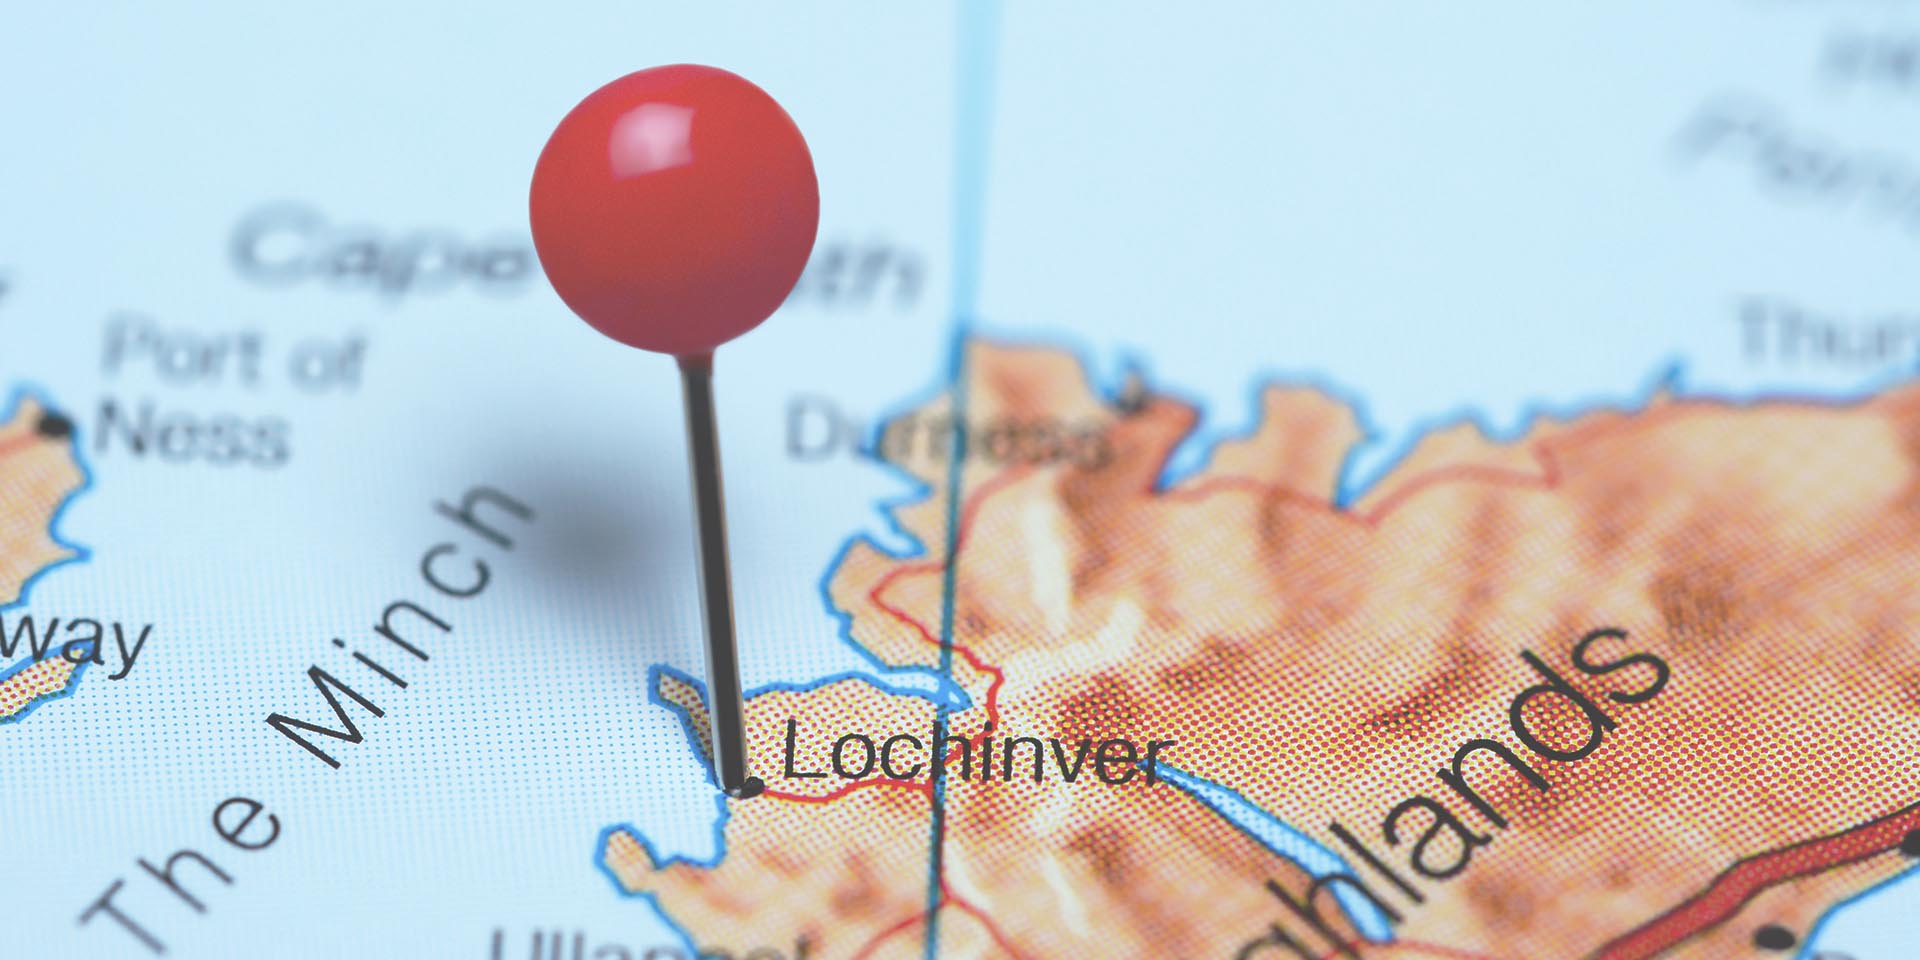 Lochinver pinned on a map of Scotland